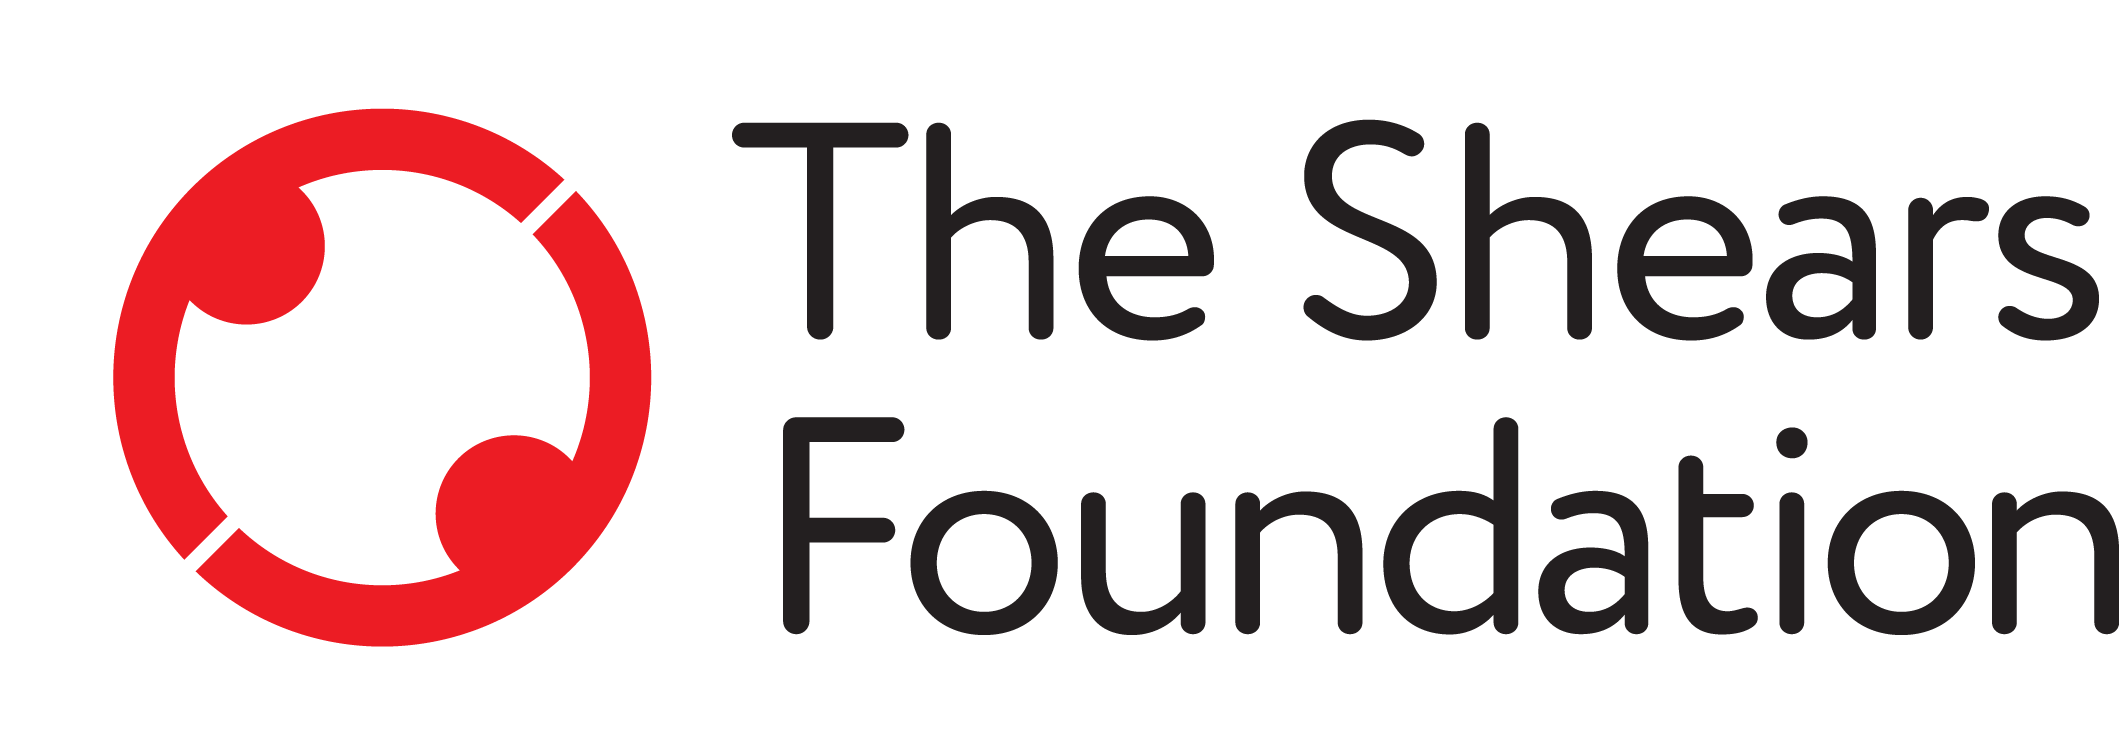 The Shears Foundation